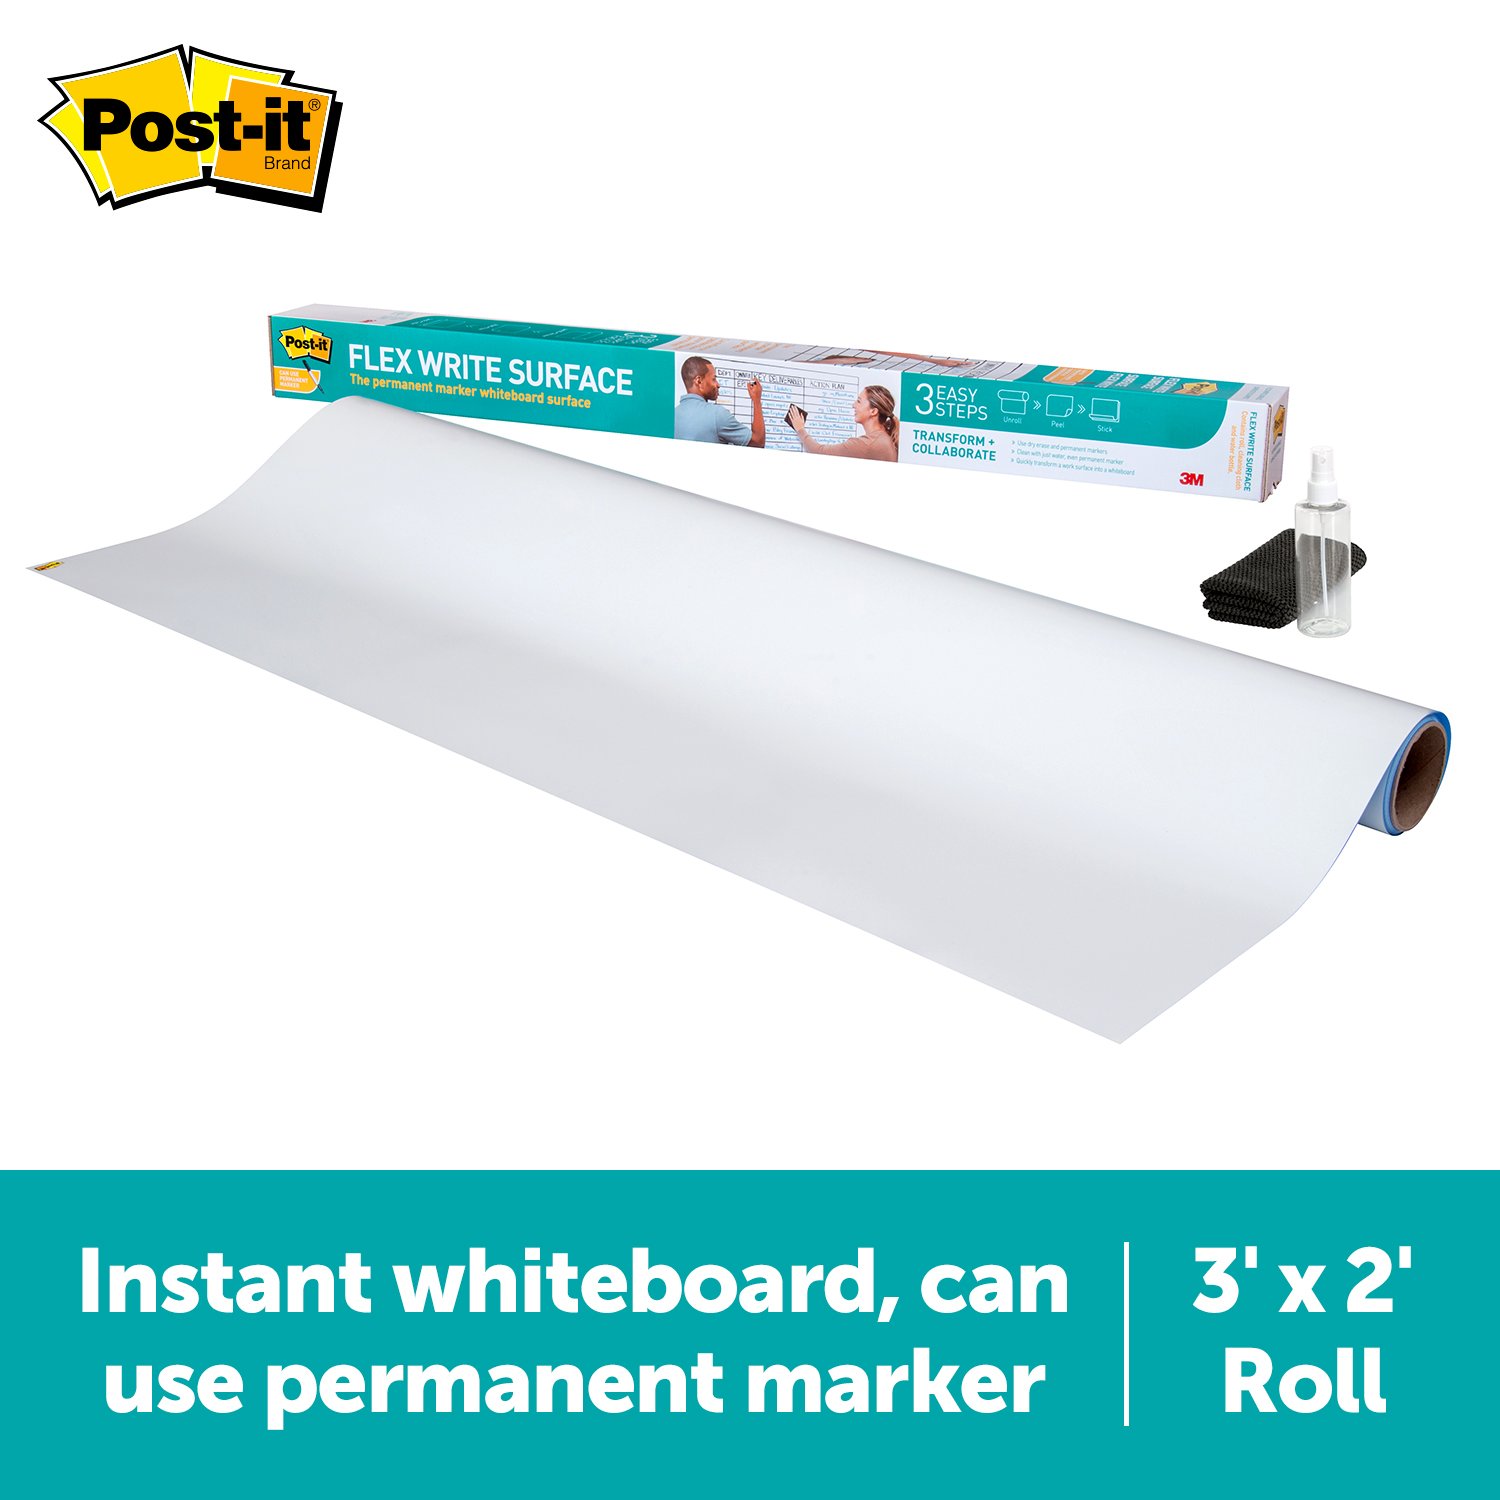 7100197625 - Post-it Flex Write Surface, The Permanent Marker Whiteboard Surface, 3
ft. x 2 ft.